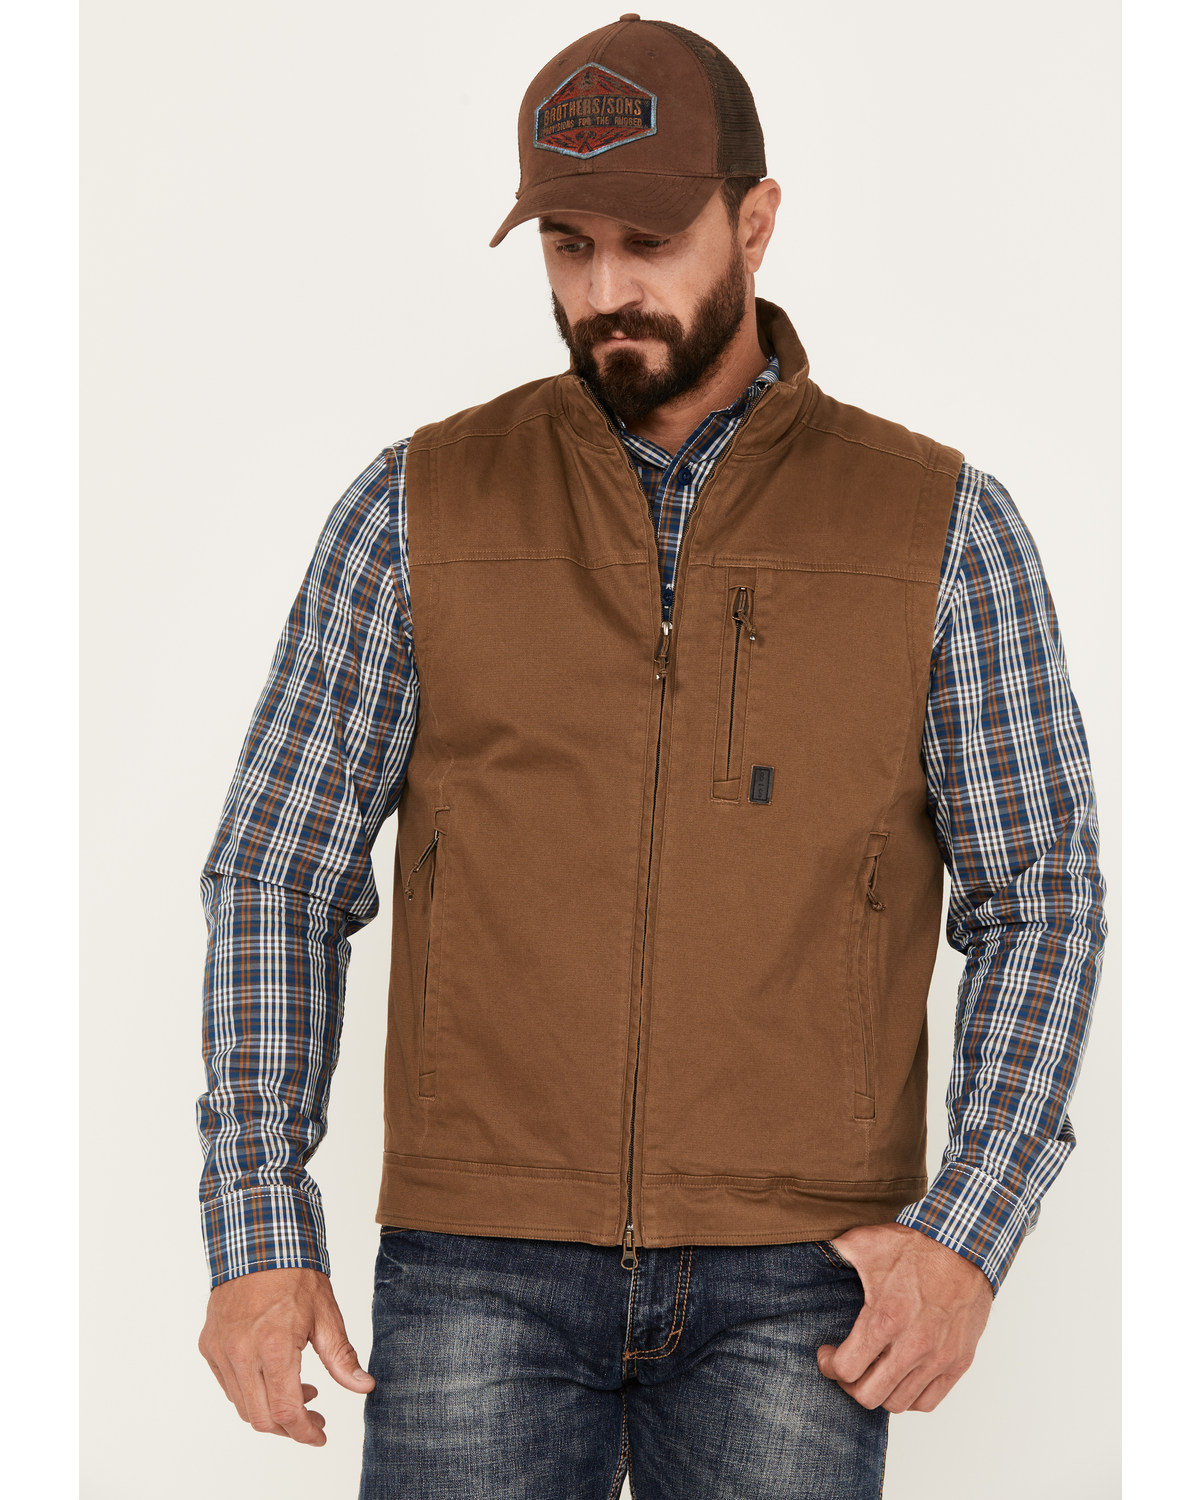 Brothers and Sons Men's Clay Zipper Vest